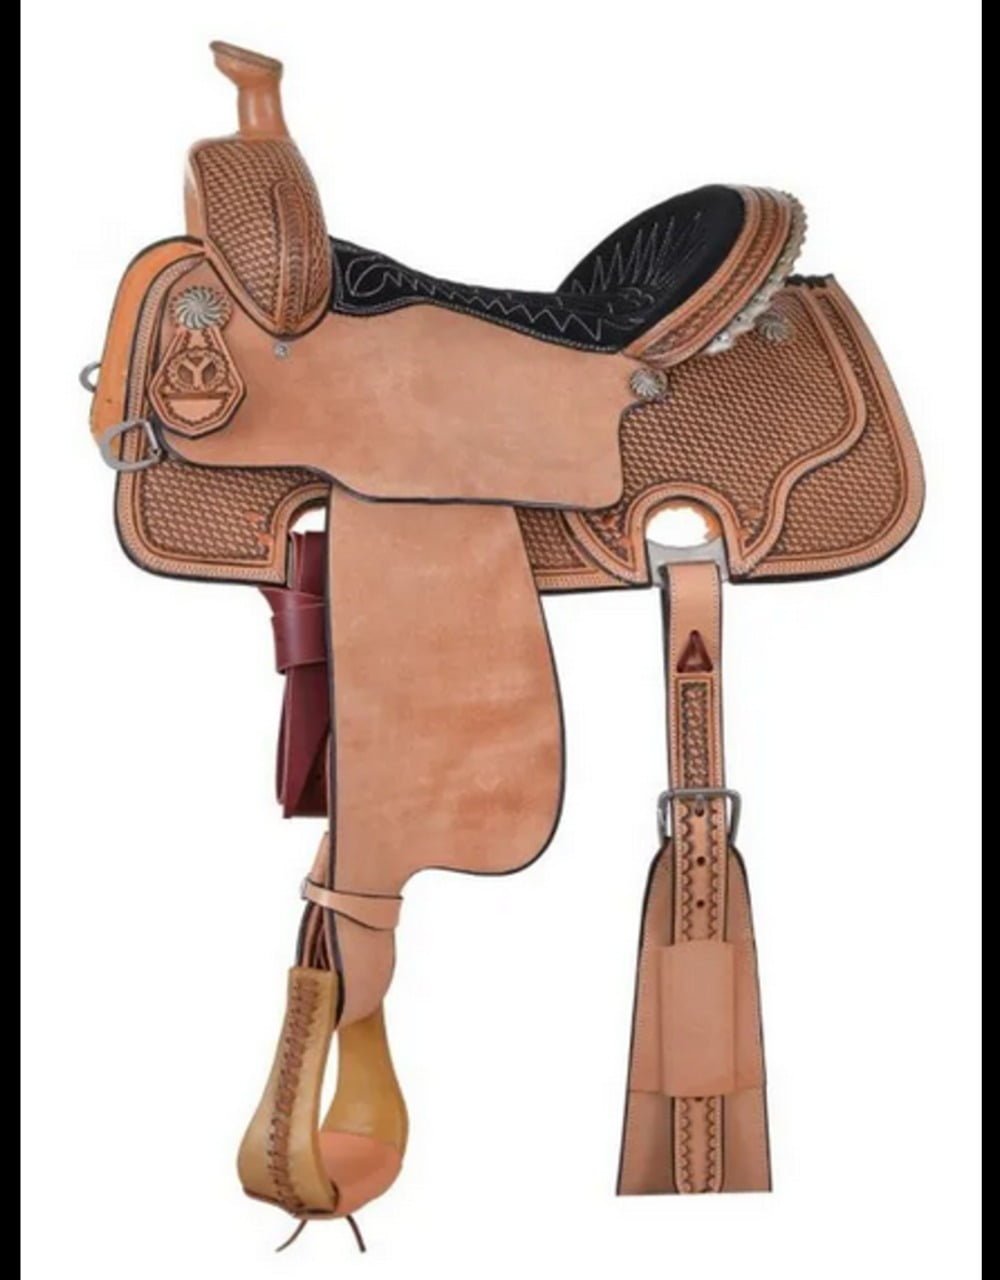 The 2164 Cheyenne all-around saddle is strong enough to rope in or lightweight to do any gymkhana events. It's tooled and handcrafted in Texas to provide you with quality that will last many years in a well-made saddle at a great price. Keep your saddle secured with the matching flank cinch that is included. Dynamic antique leather finish ties in with the color of the black suede seat, which provides stick in any event. Country of Manufacture United States Discipline All Around Weight 35.00 Pounds Cantle Height 3.50 inches Brand Circle Y Horn 3" Neck x 2 3/4" Cap Swell 13 inches Seat Color Black Suede Seat Size 12", 12 1/2", 13", 13 1/2", 14", 14 1/2", 15", 15 1/2", 16" Color Antique Tooling Degree 1/2 Tooling Tooling Type Basketweave Rigging 7/8 Double In-skirt Tree Type BGC All Around Tree Fit Regular, Wide Skirt Drop 14.50 inches Skirt Length 25.00 inches Weight 35.0000